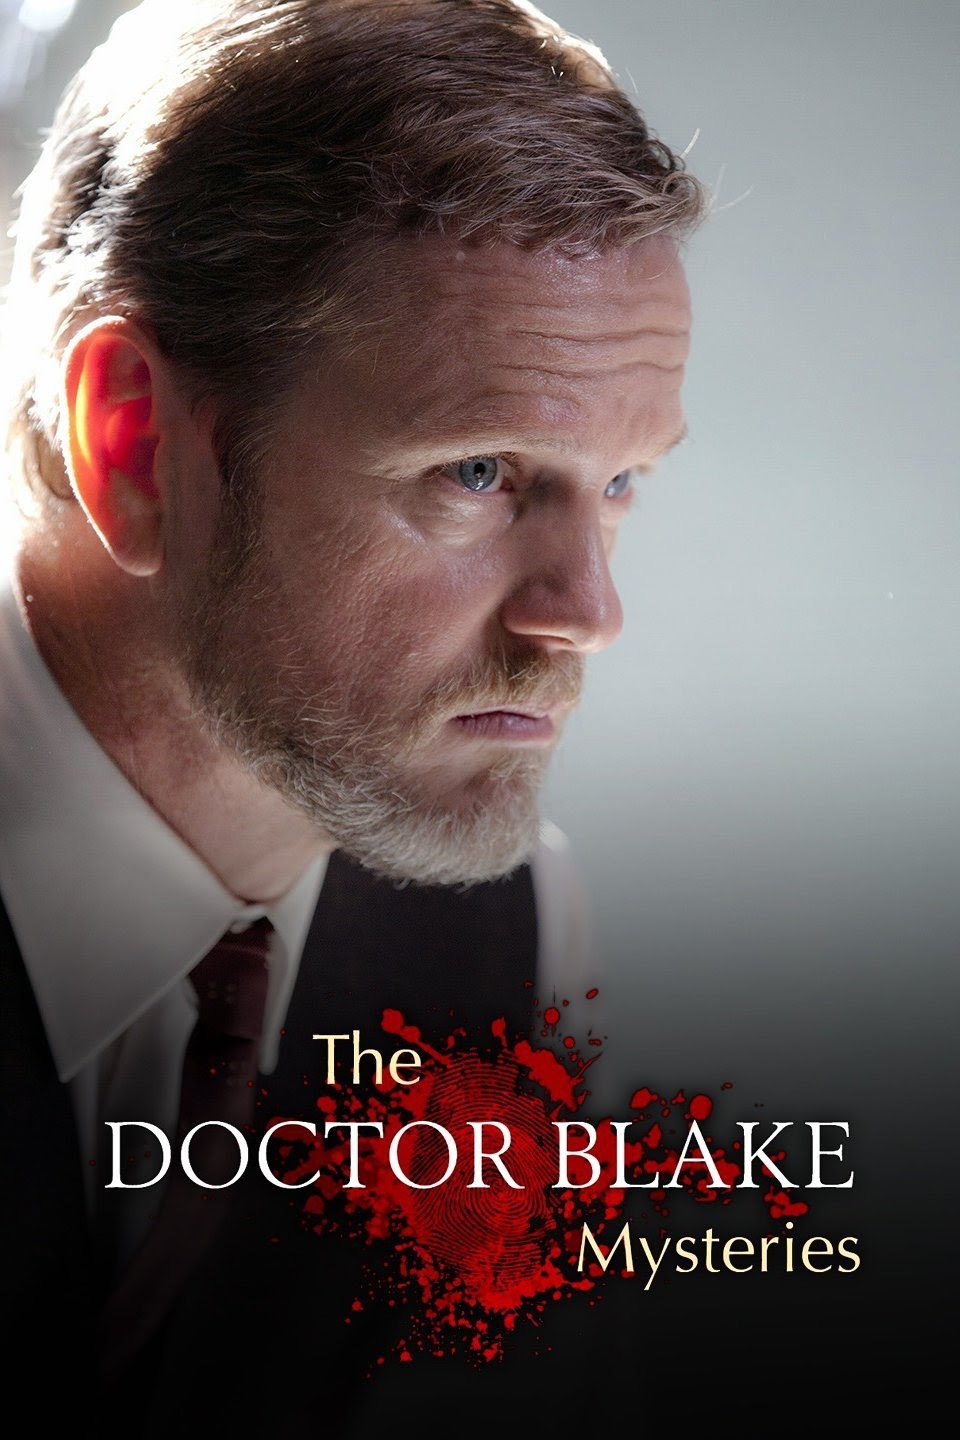 The Doctor Blake Mysteries S2 E5